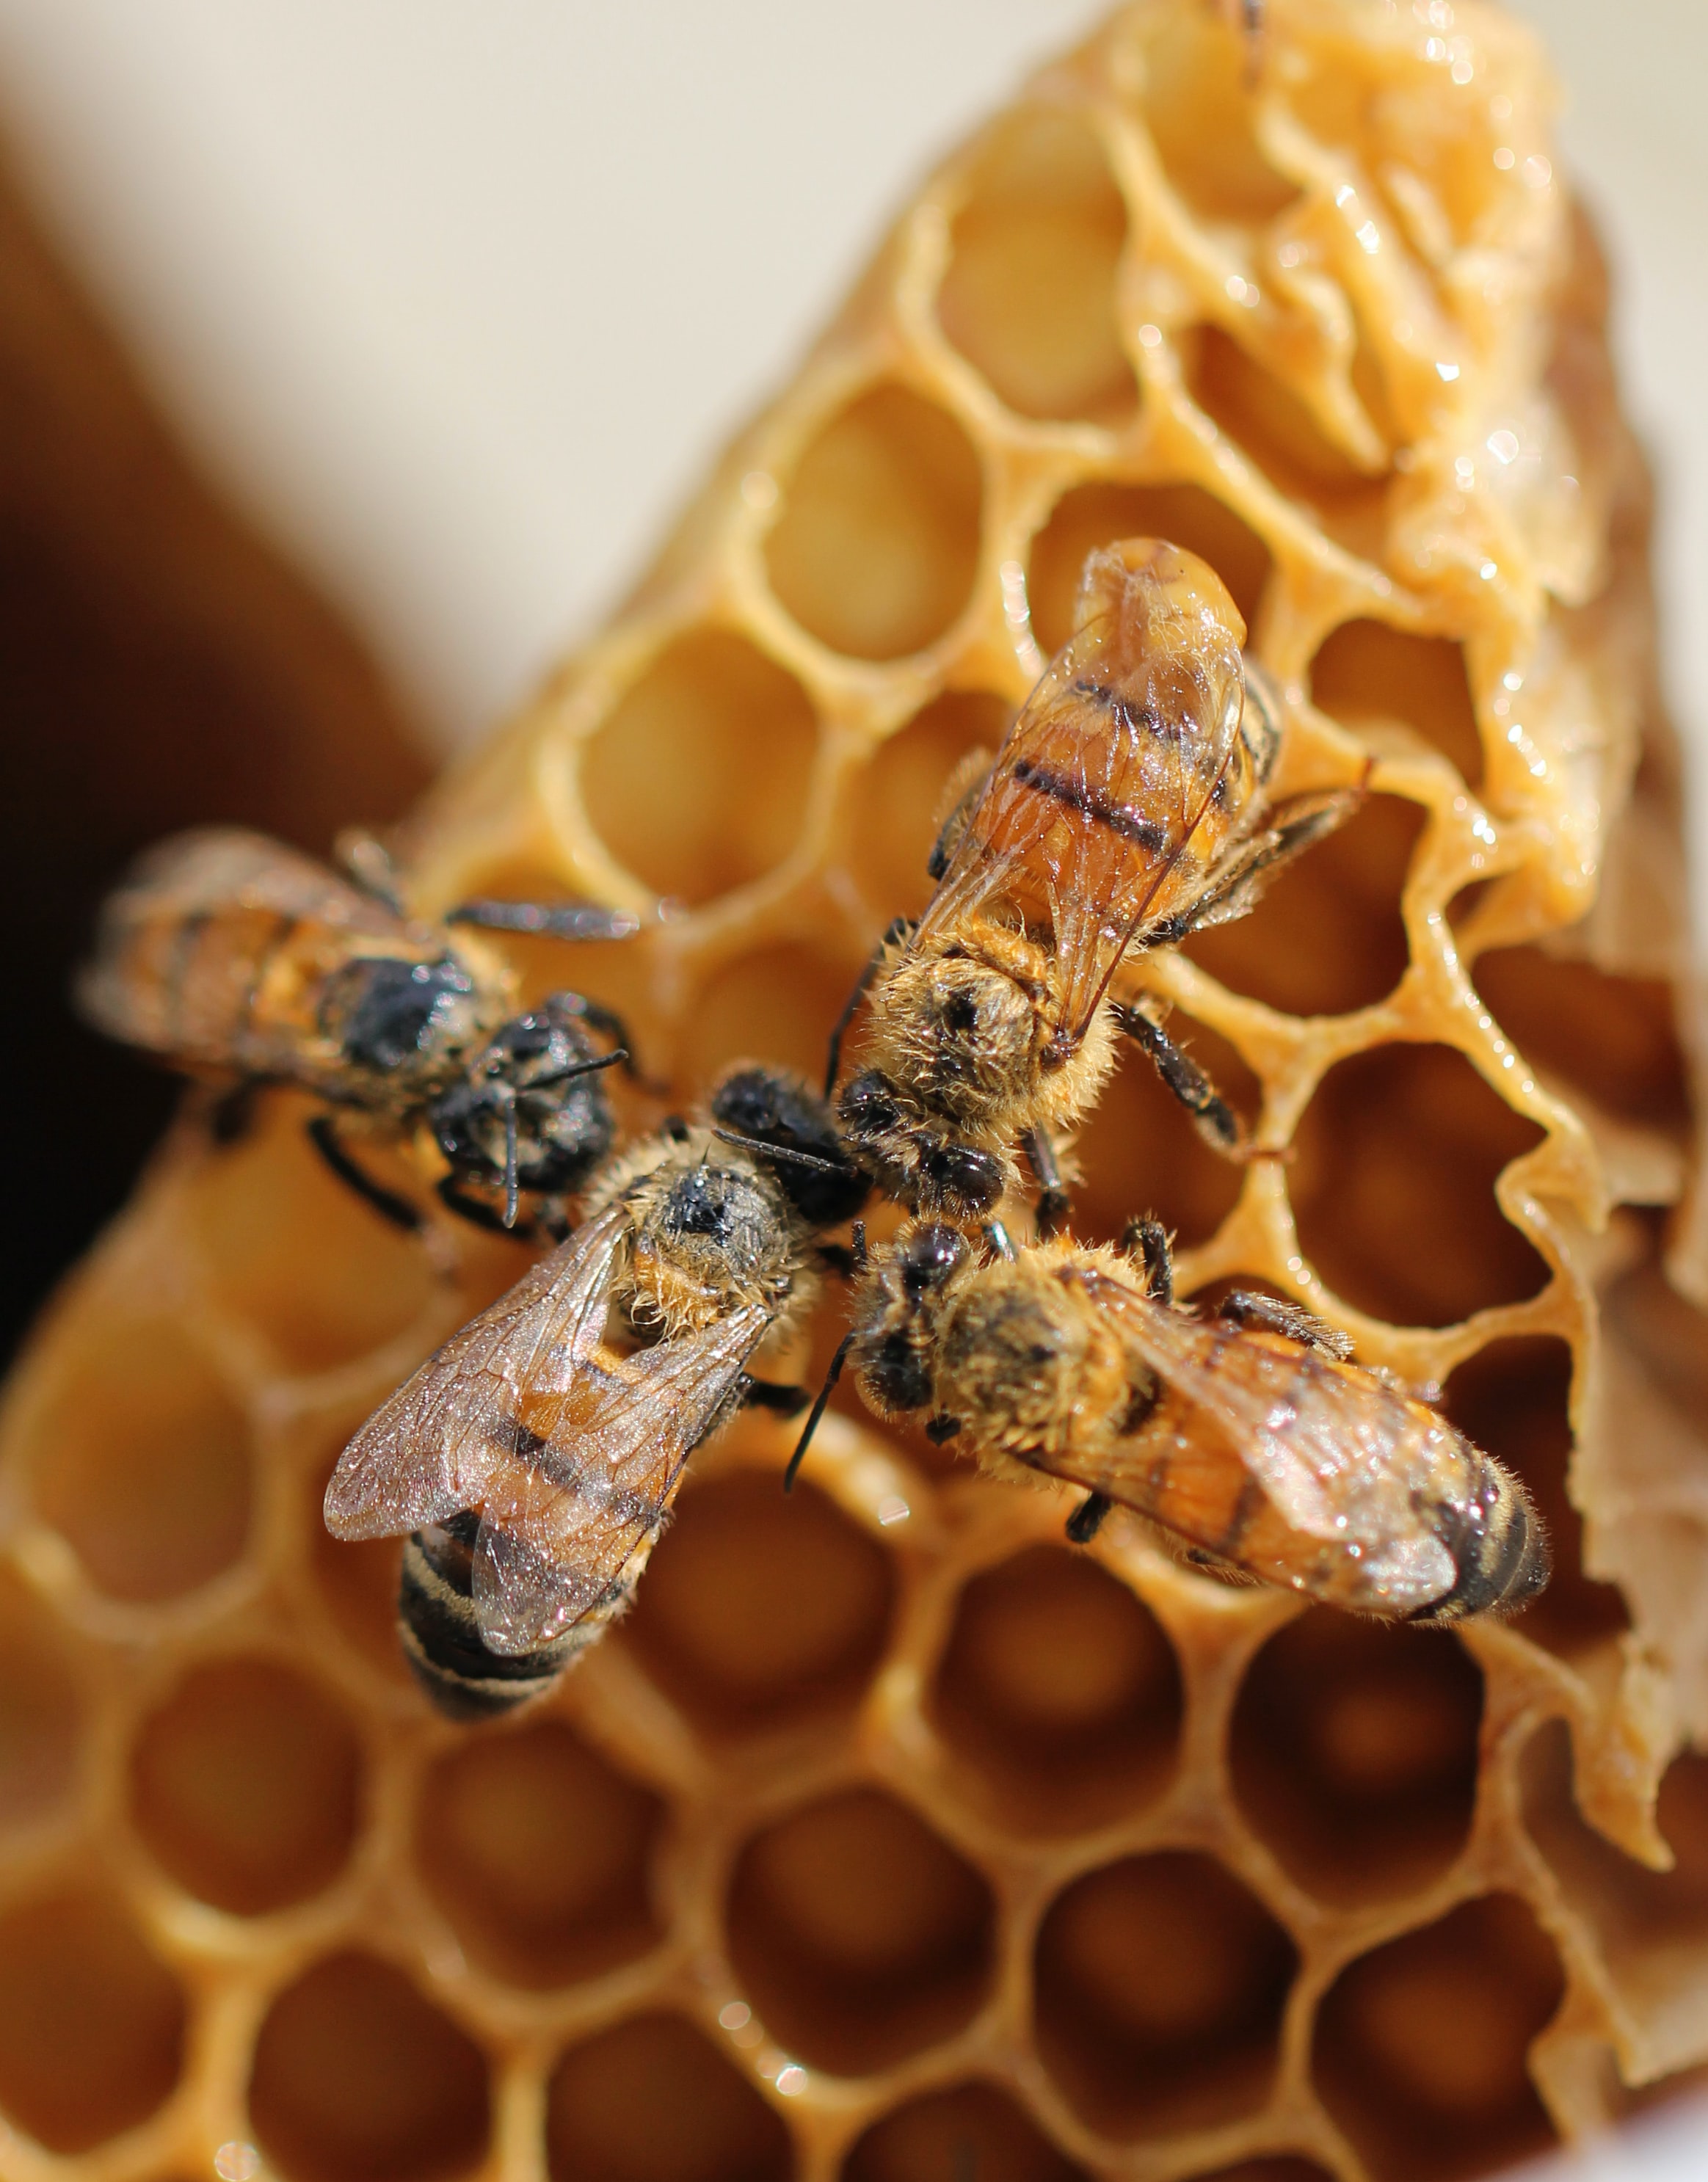 Four bees facing each other with heads touching with honeycomb behind them